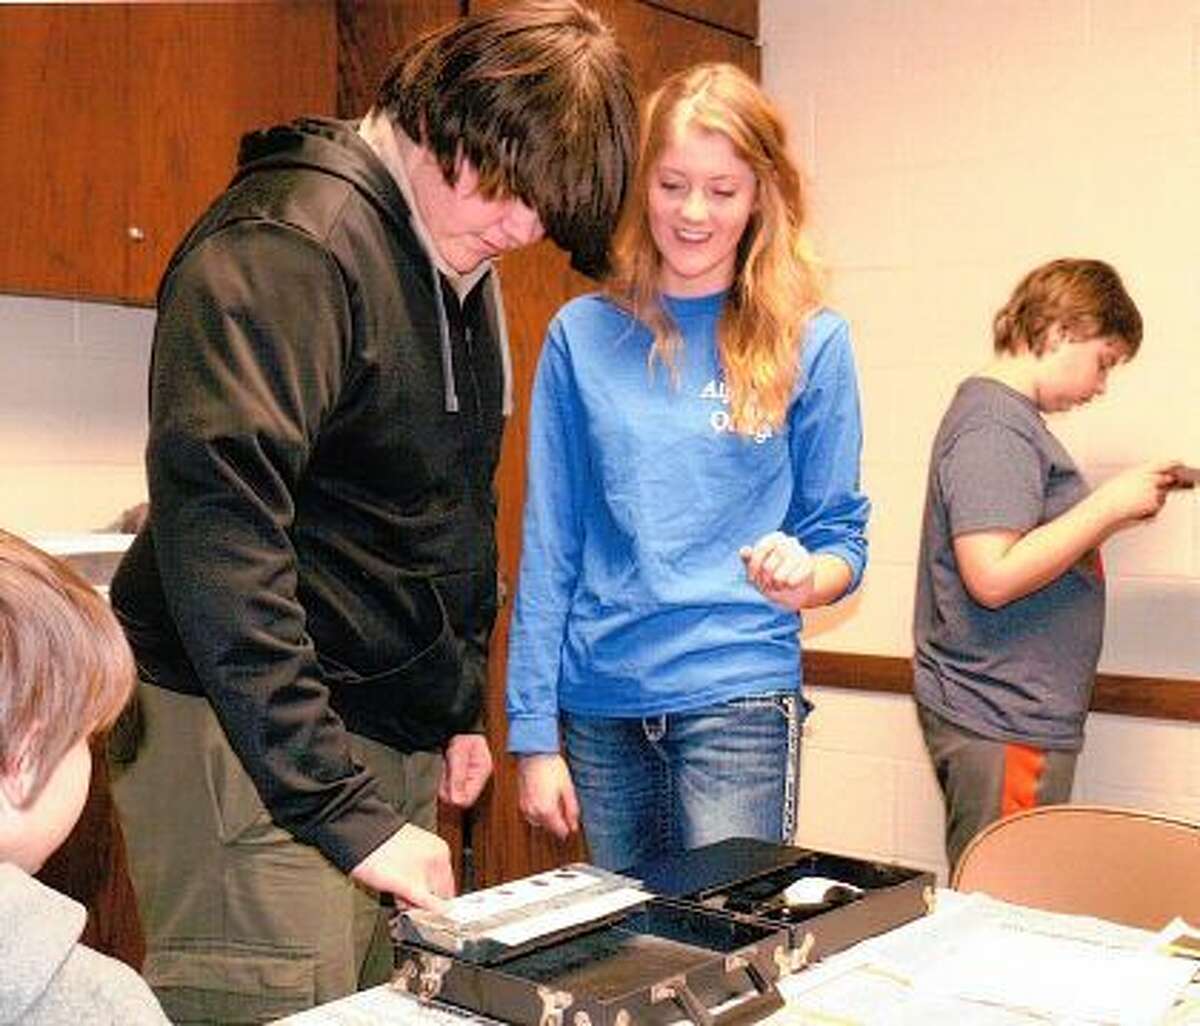 Ethan Elmore of Troop 107 takes his own fingerprints, guided by Madison Pfaff, a member of Illinois College’s Alpha Phi Omega, during a merit badge clinic.